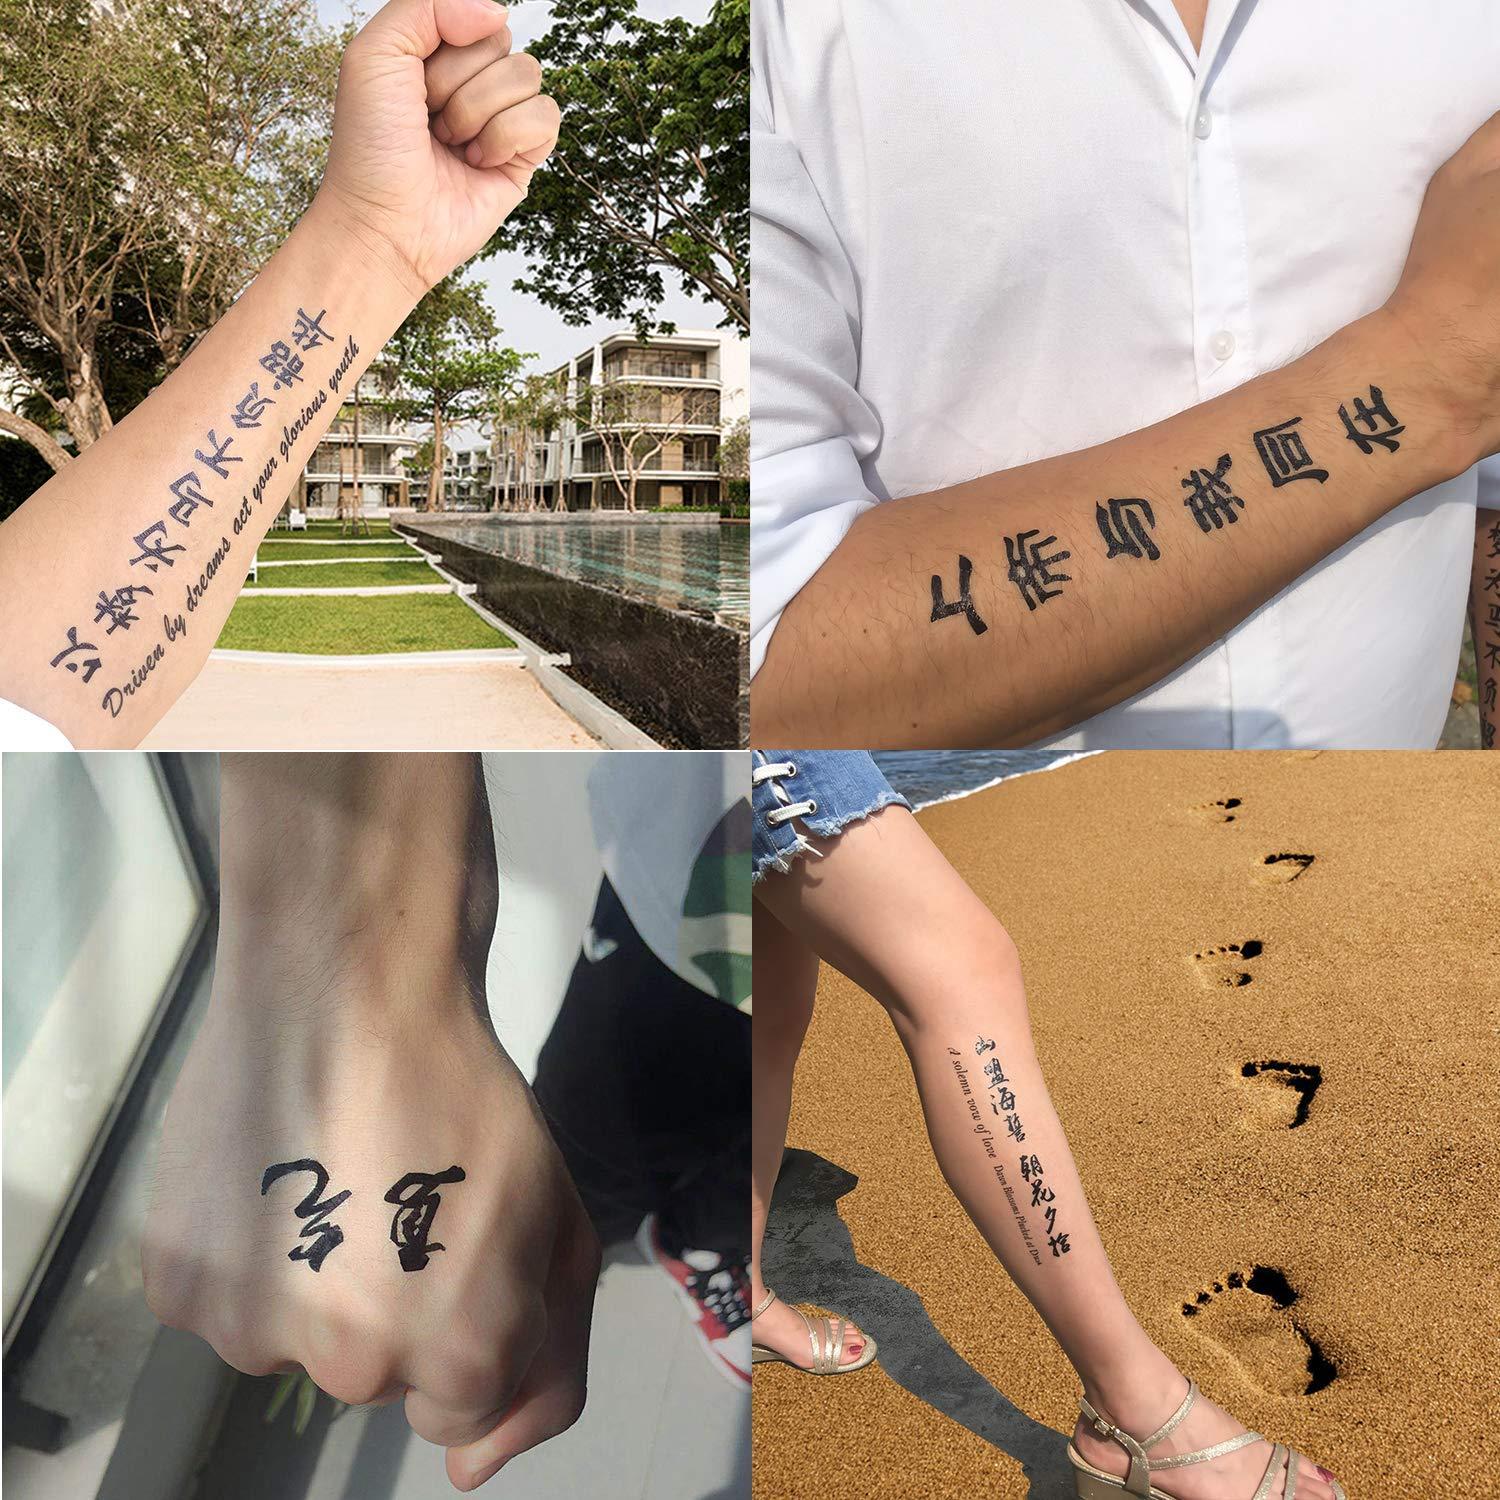 50 Meaningful Chinese Symbol Tattoos and Designs - Bored Art